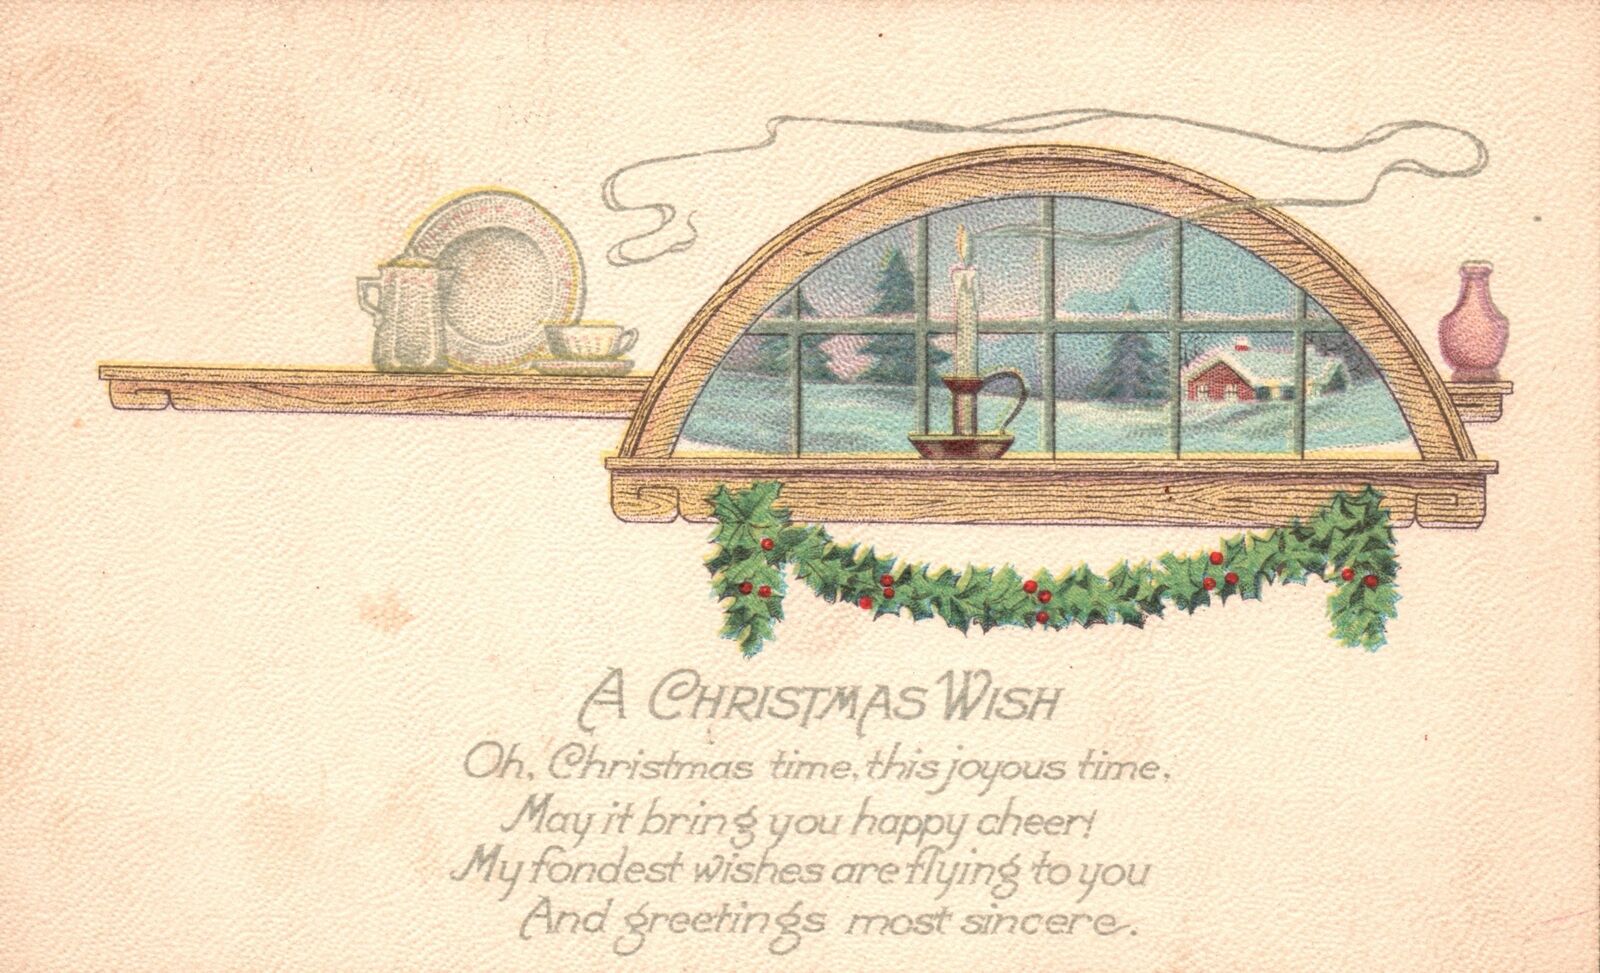 Vintage Postcard 1920's A Christmas Wish Windows Decor Holiday Special Greetings